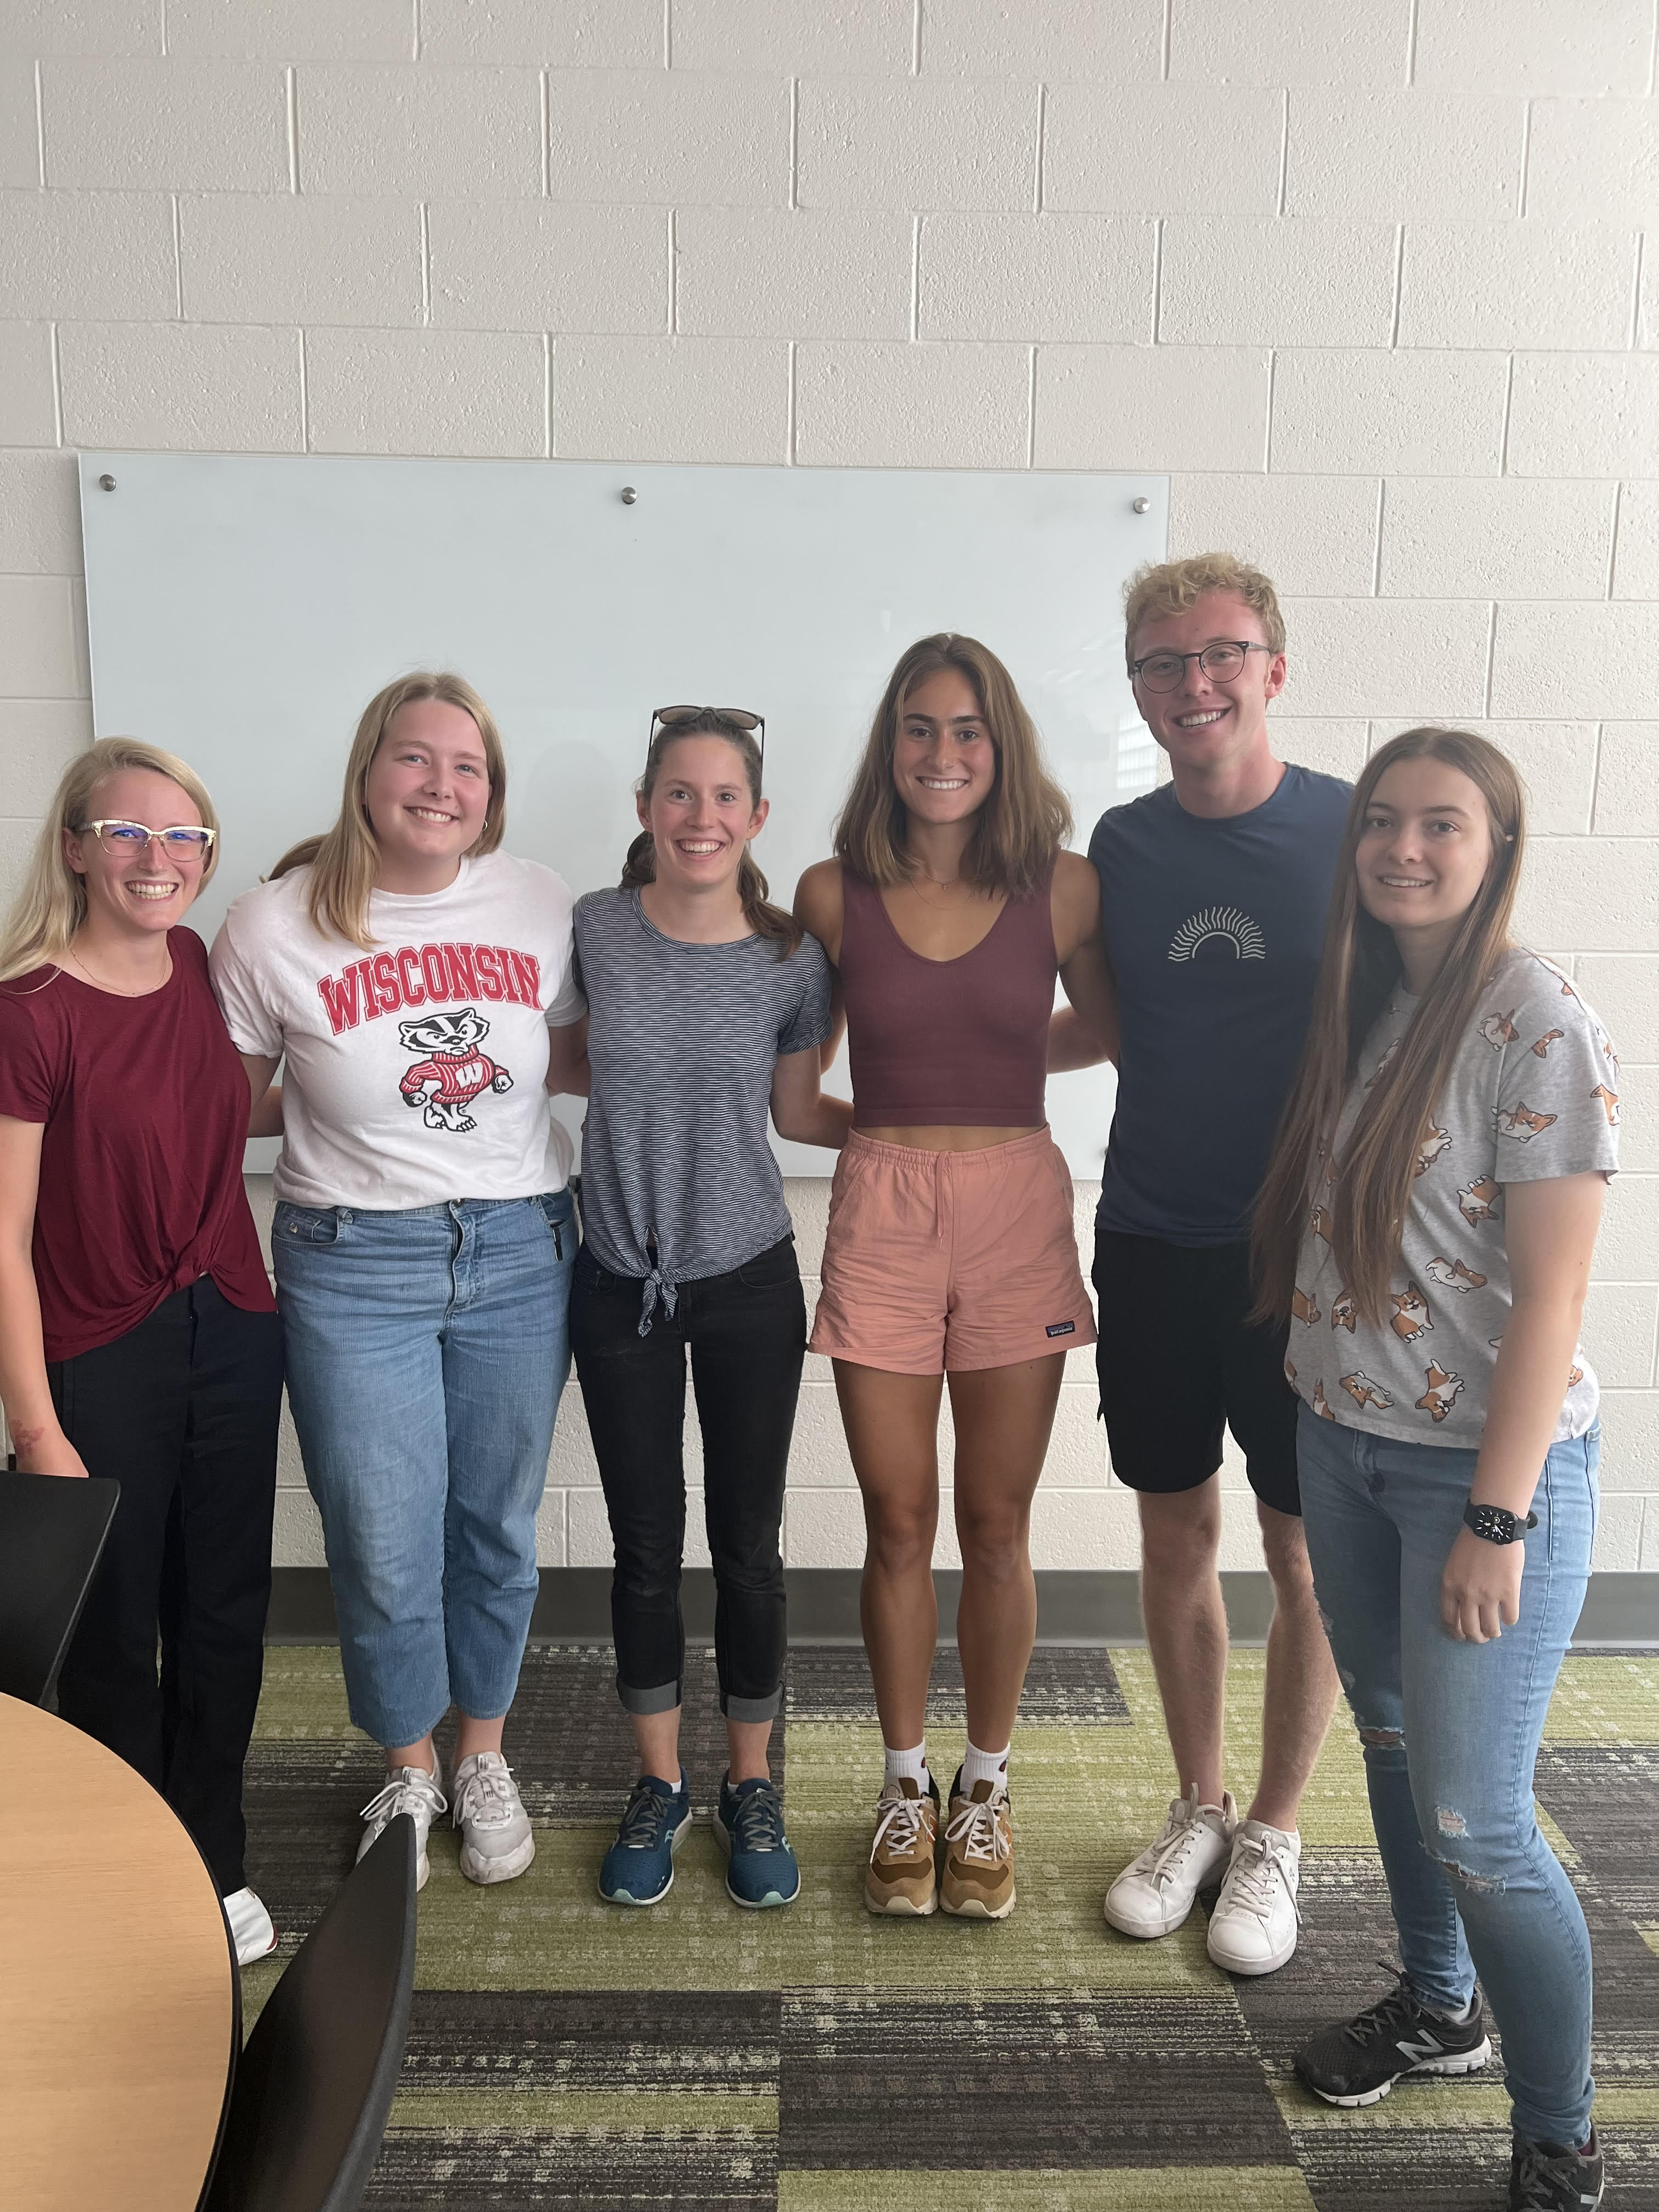 A Photo of the members working on the project. From left to right: Cora (Communicator) , Maggie (BPAG) , Molly (BSAC) , Lauren (Leader), Zach (Leader), Emily (BWIG).